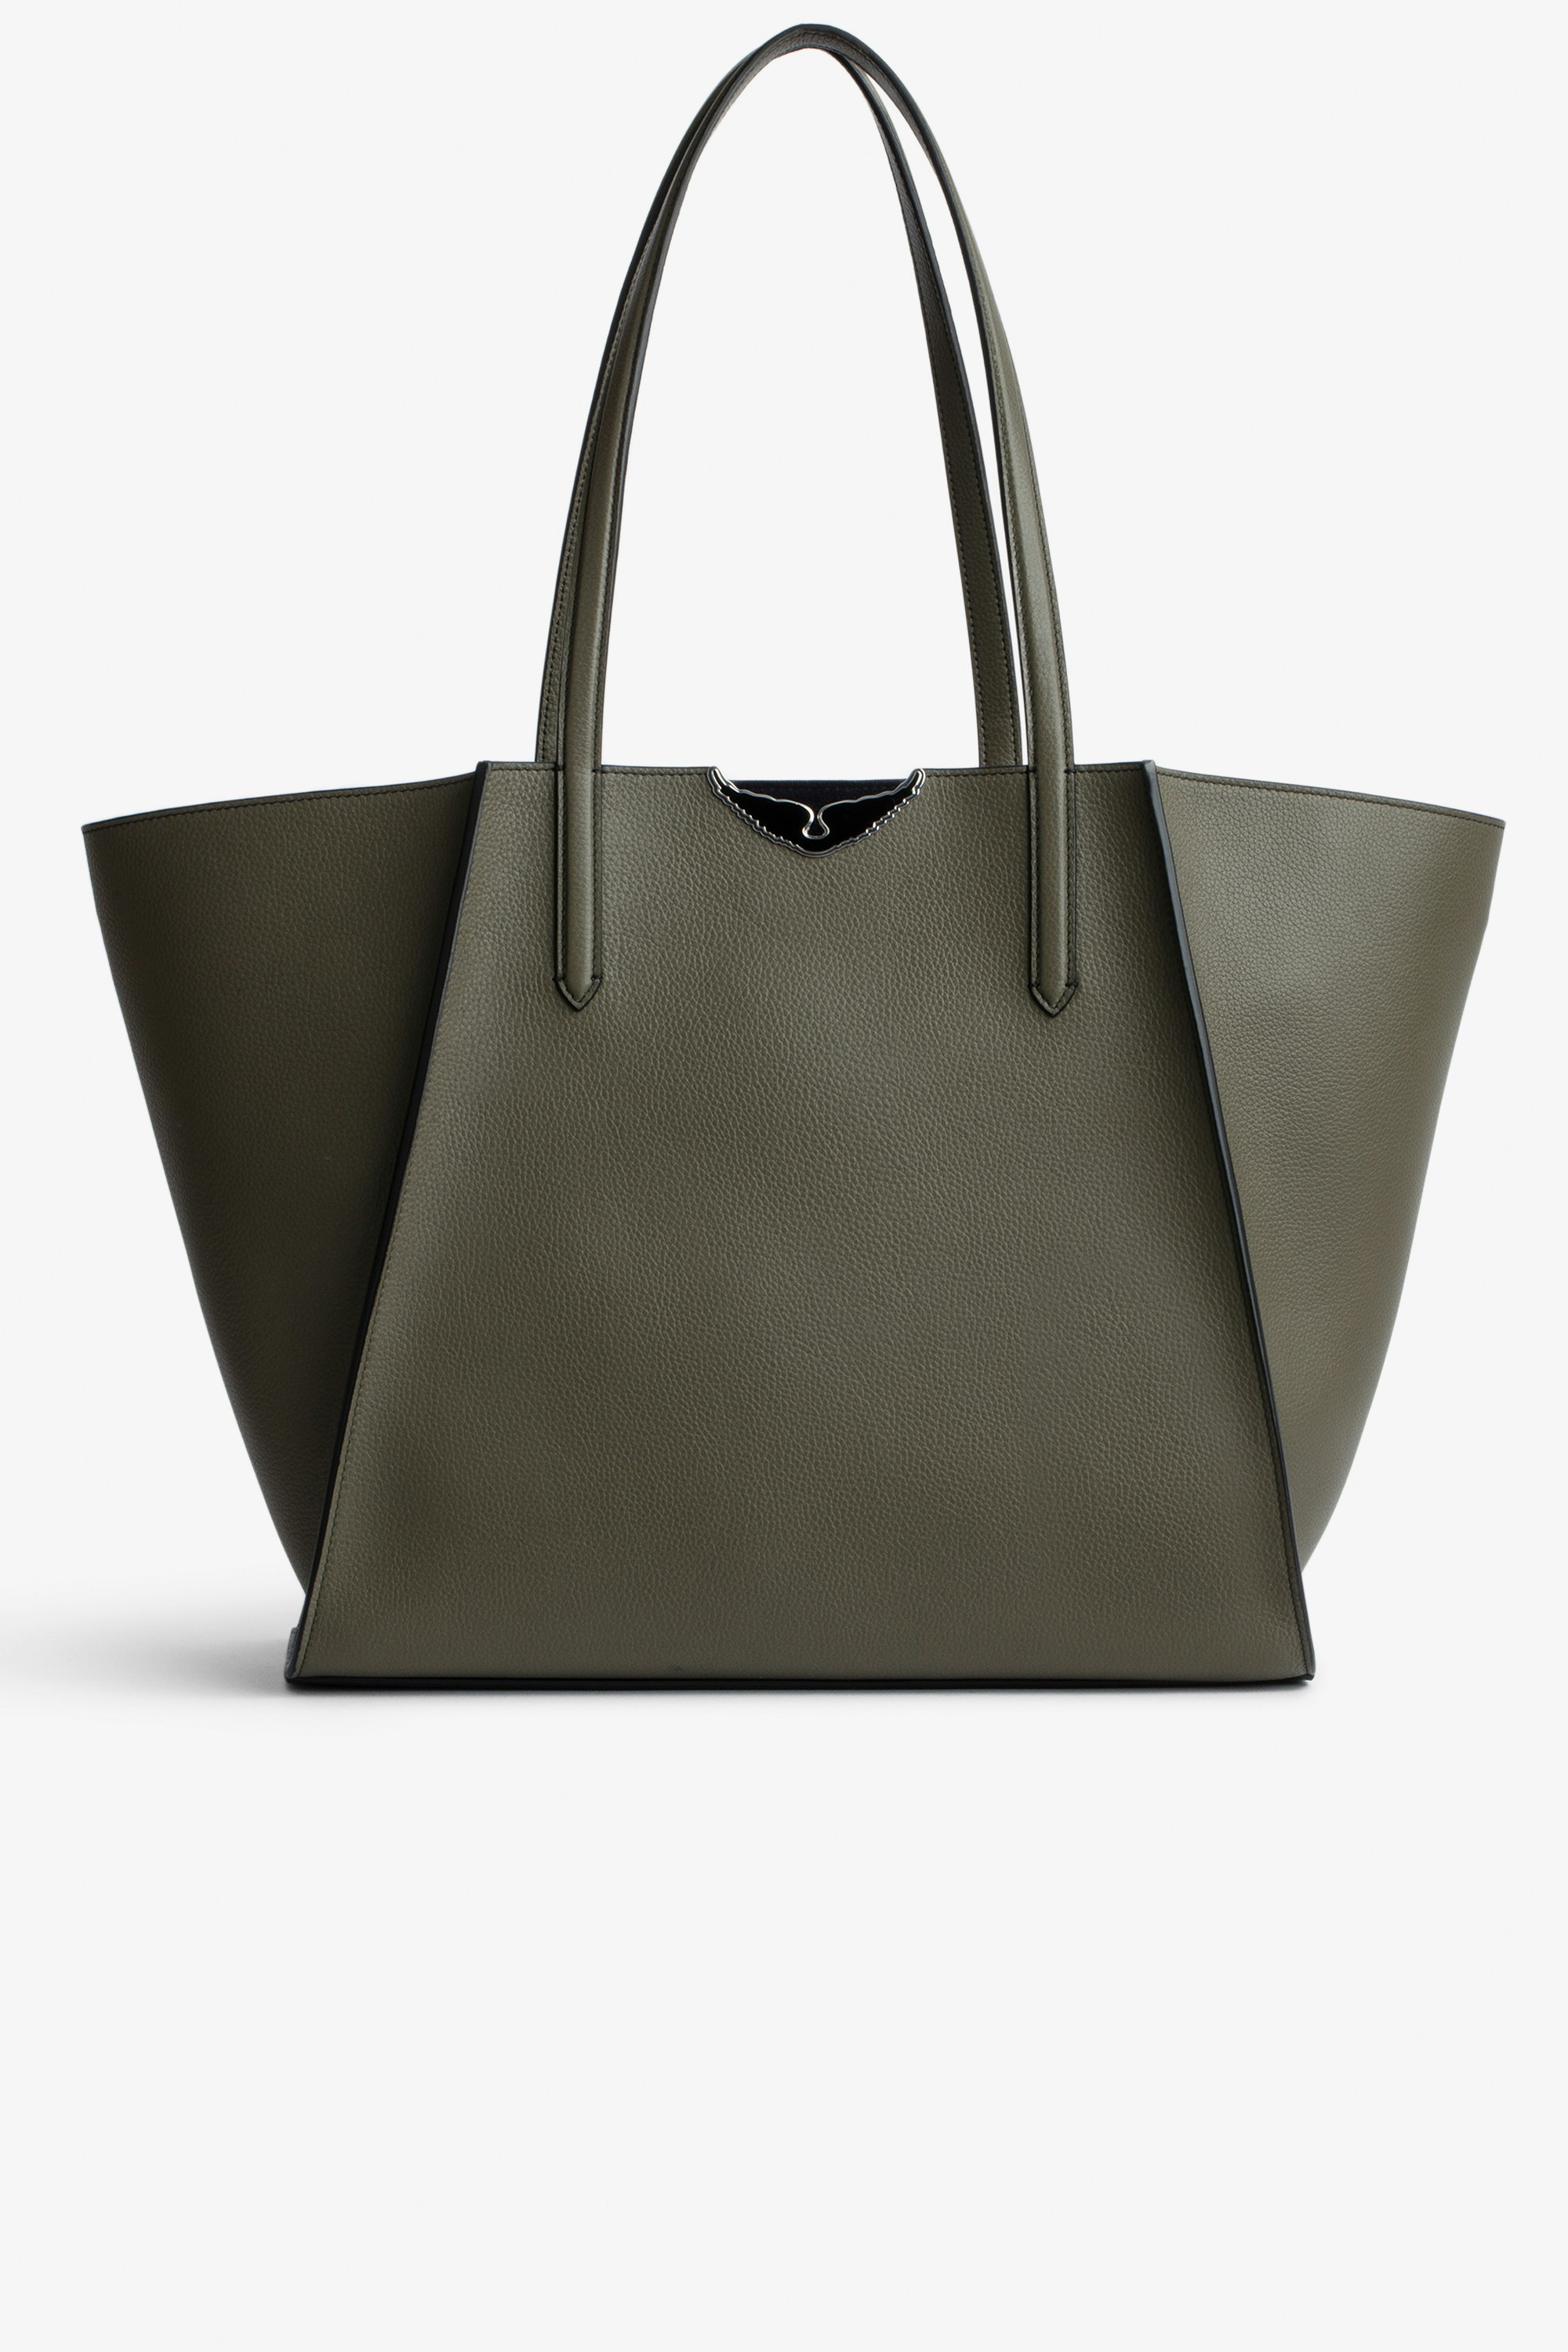 Le Borderline Bag Women's reversible tote bag in khaki grained leather and navy-blue suede with black lacquered wings